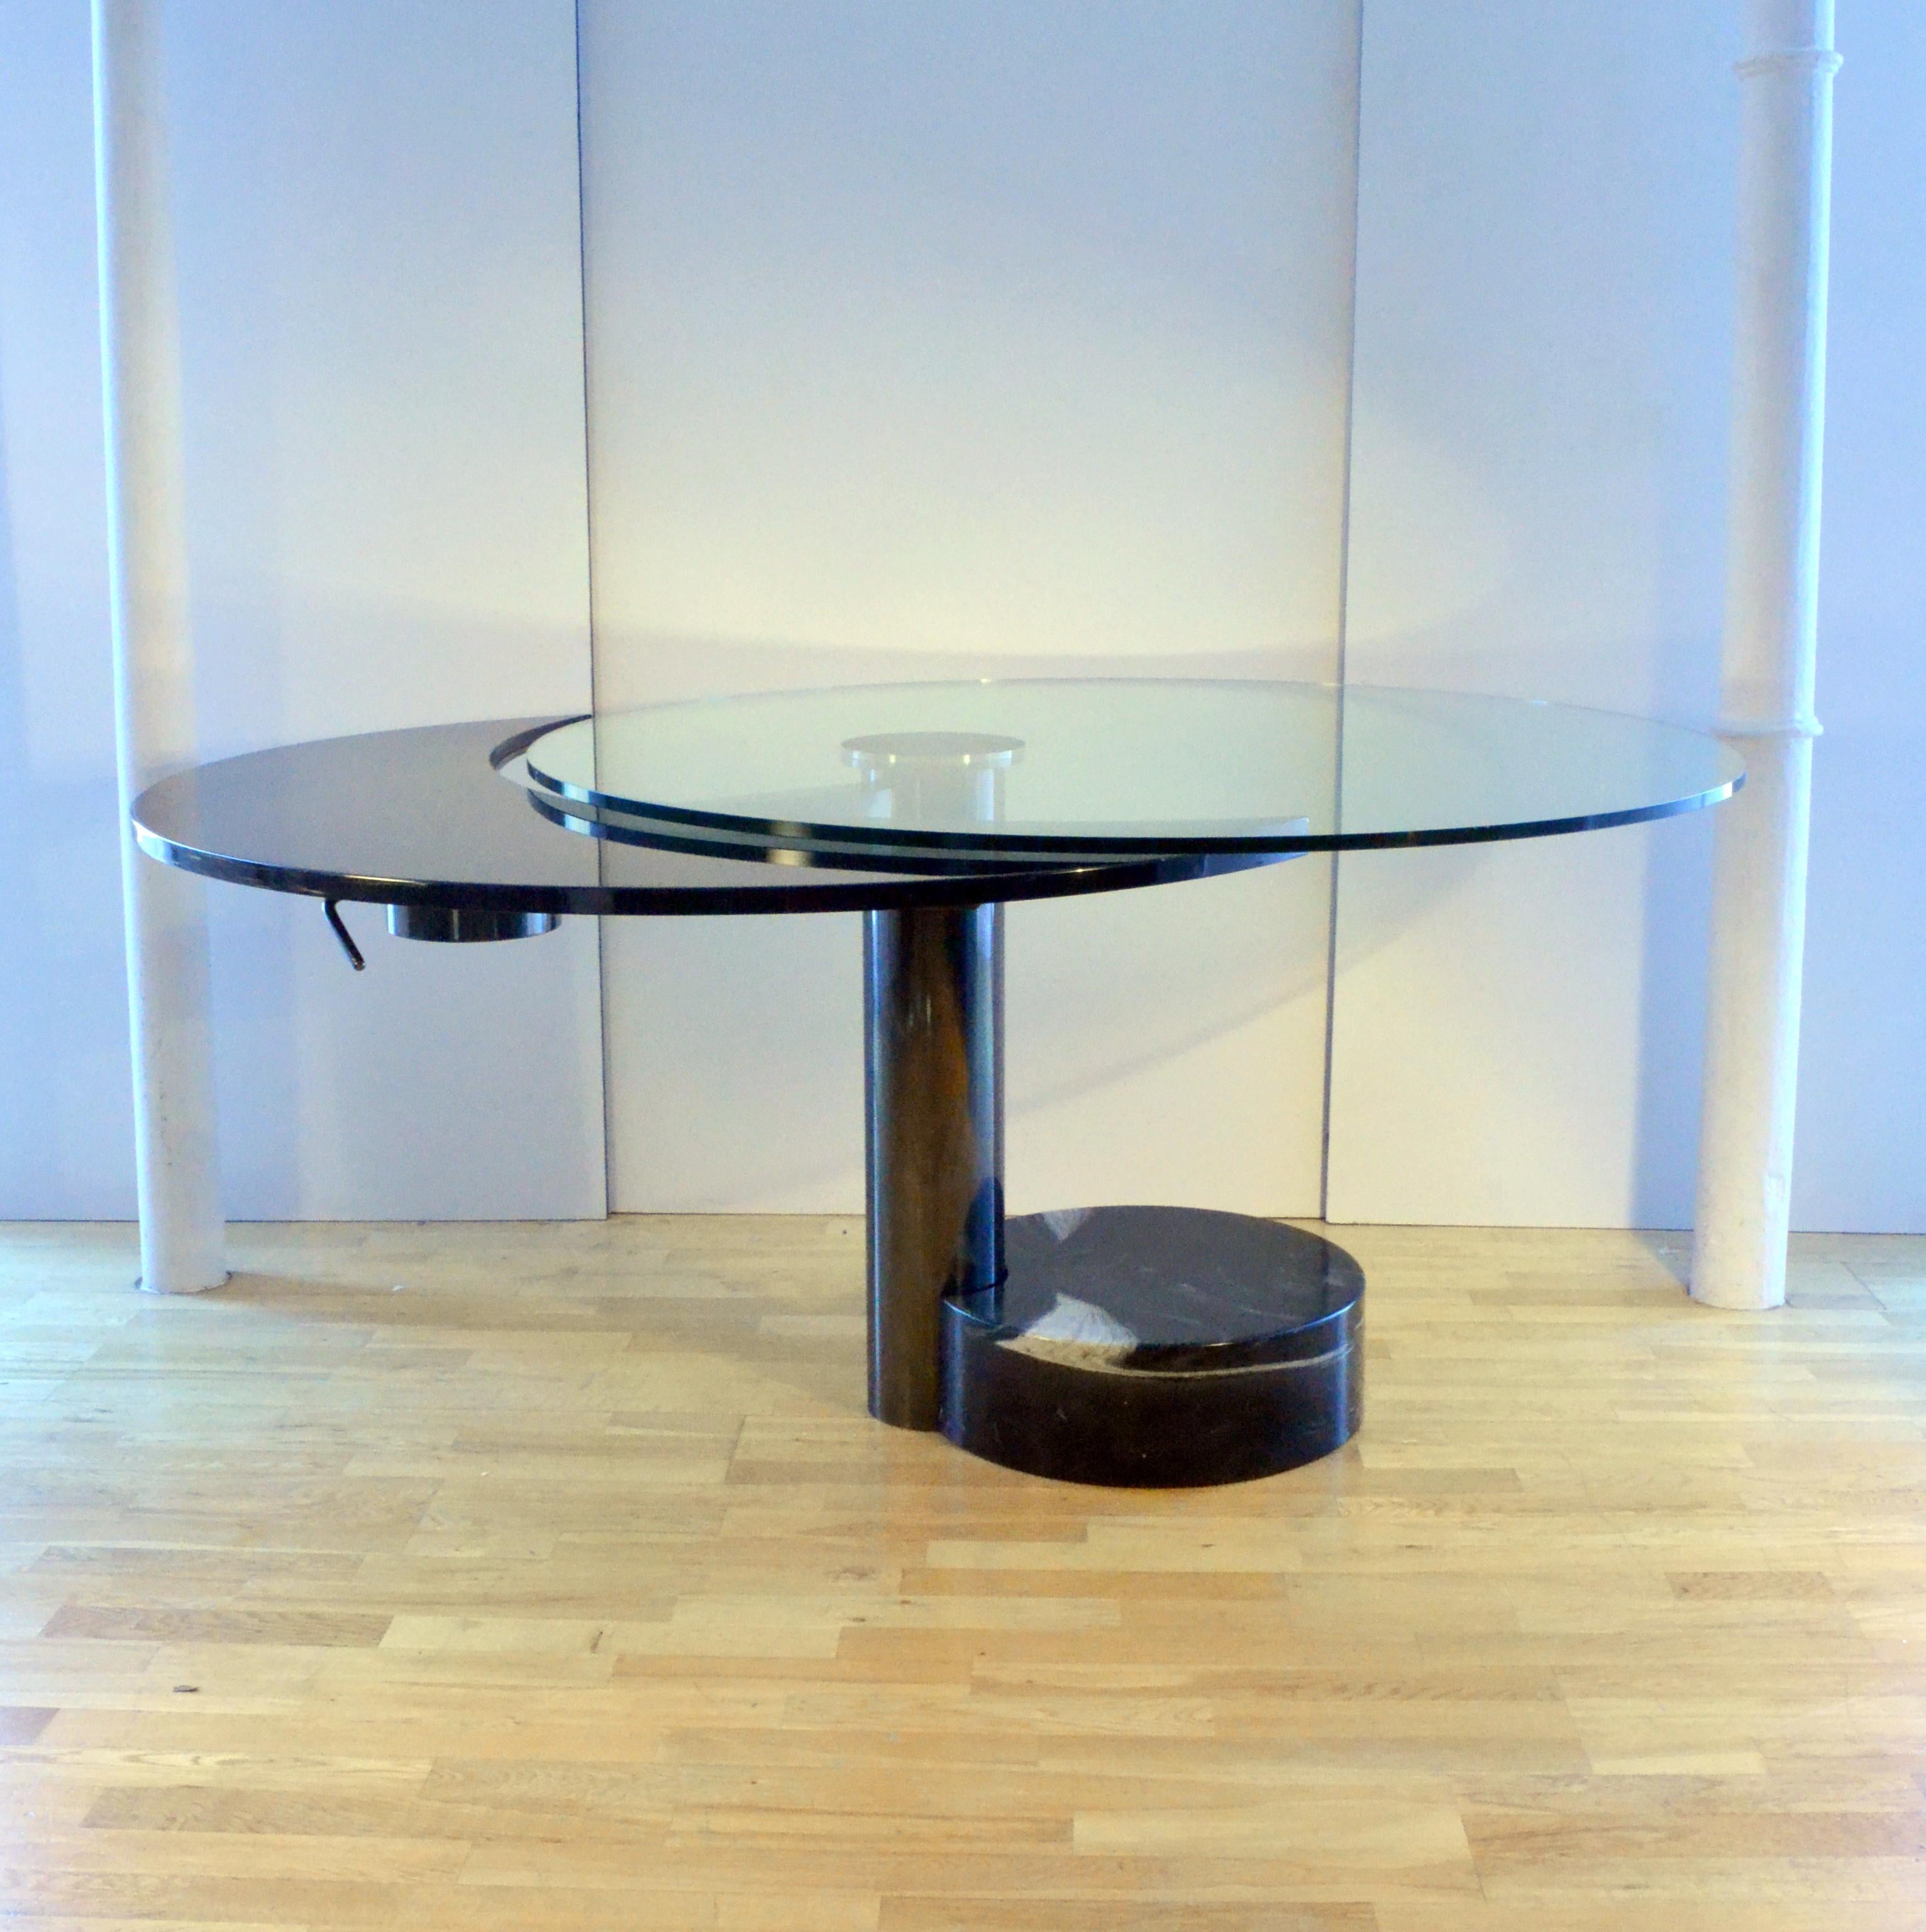 Stainless Steel 1960s Round Dining Table with Black Oval Extension Attributed to Pierre Cardin